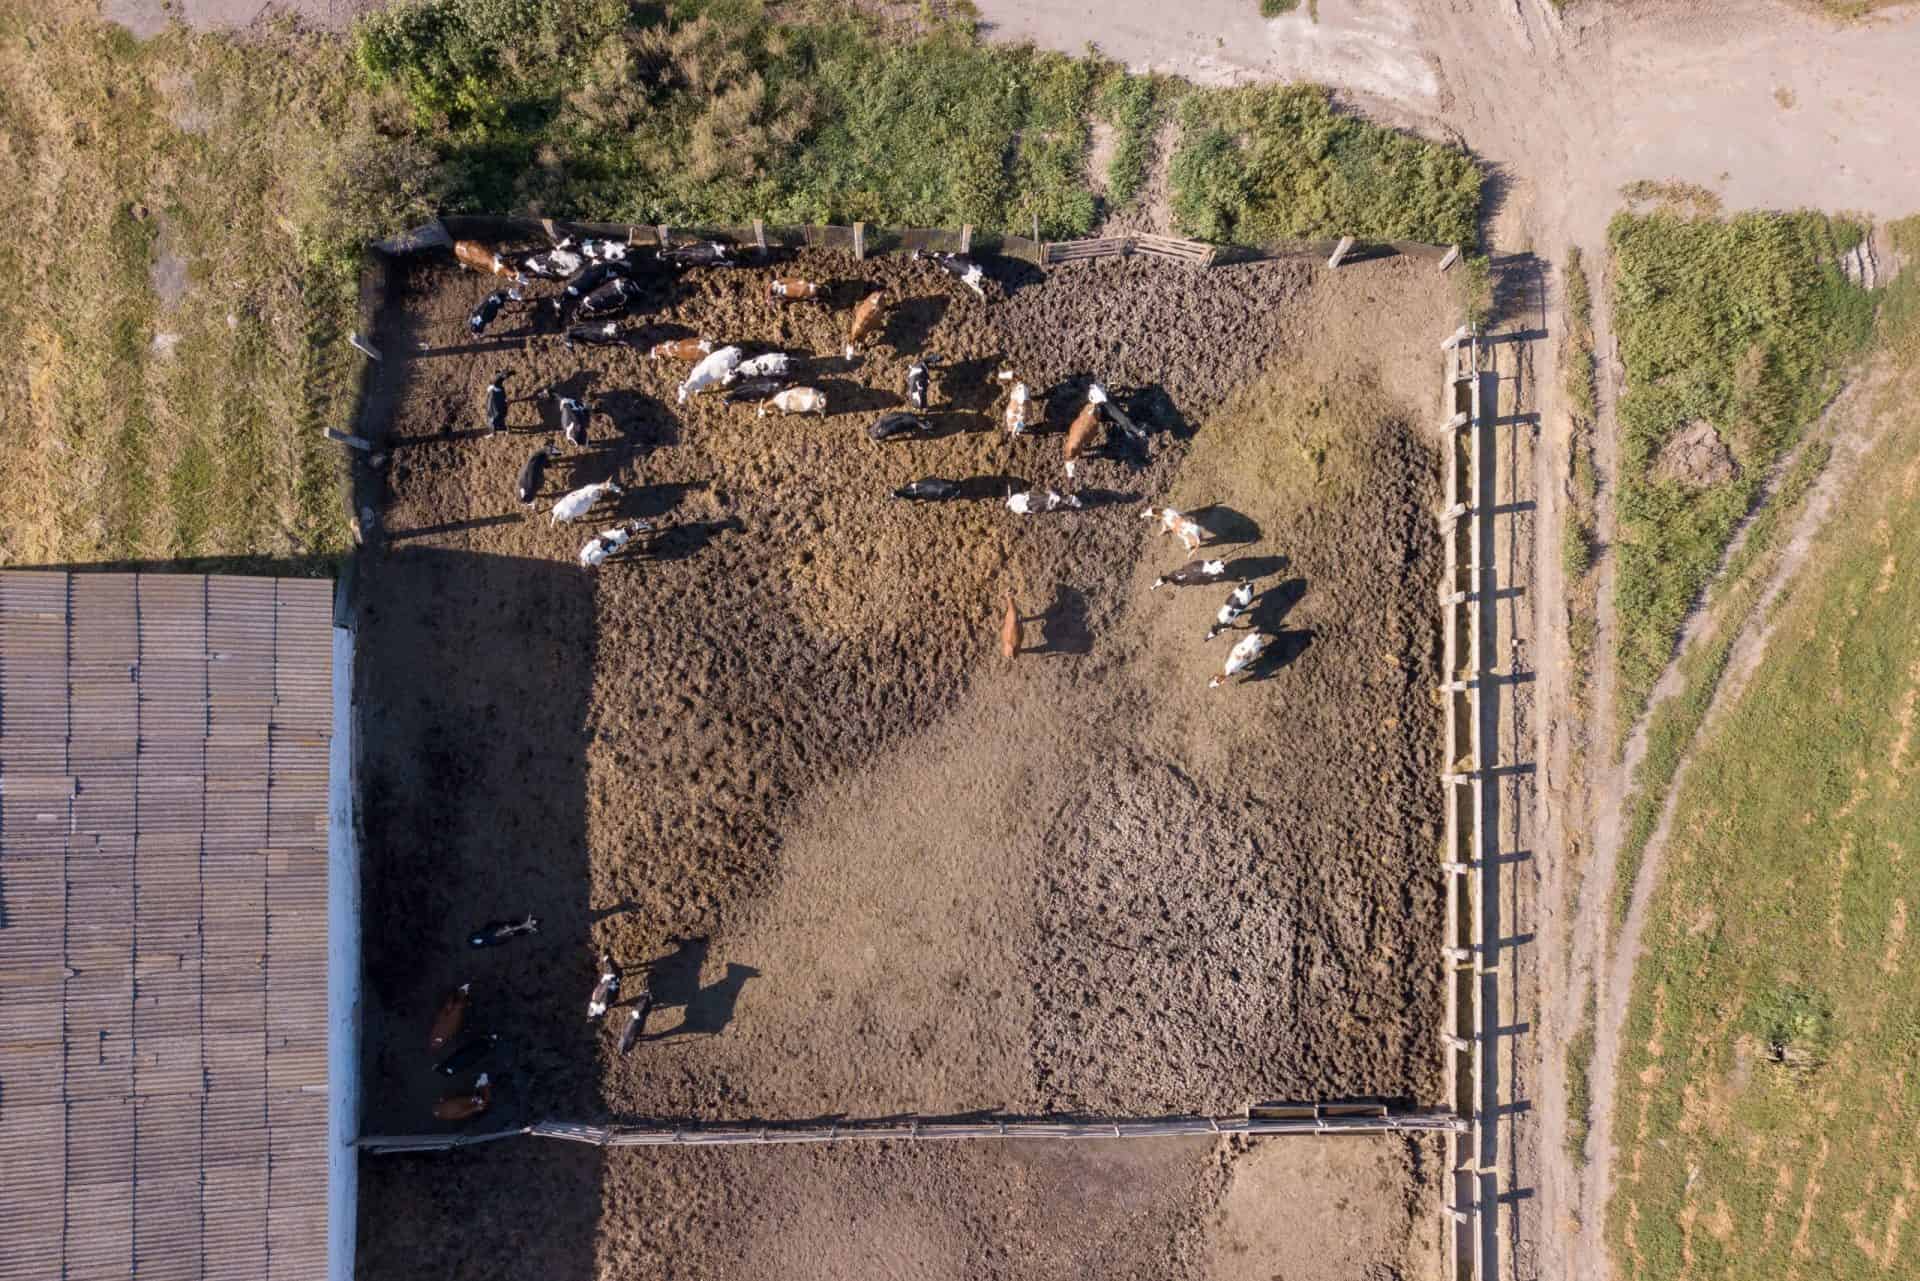 Drone view of cows on a feedlot